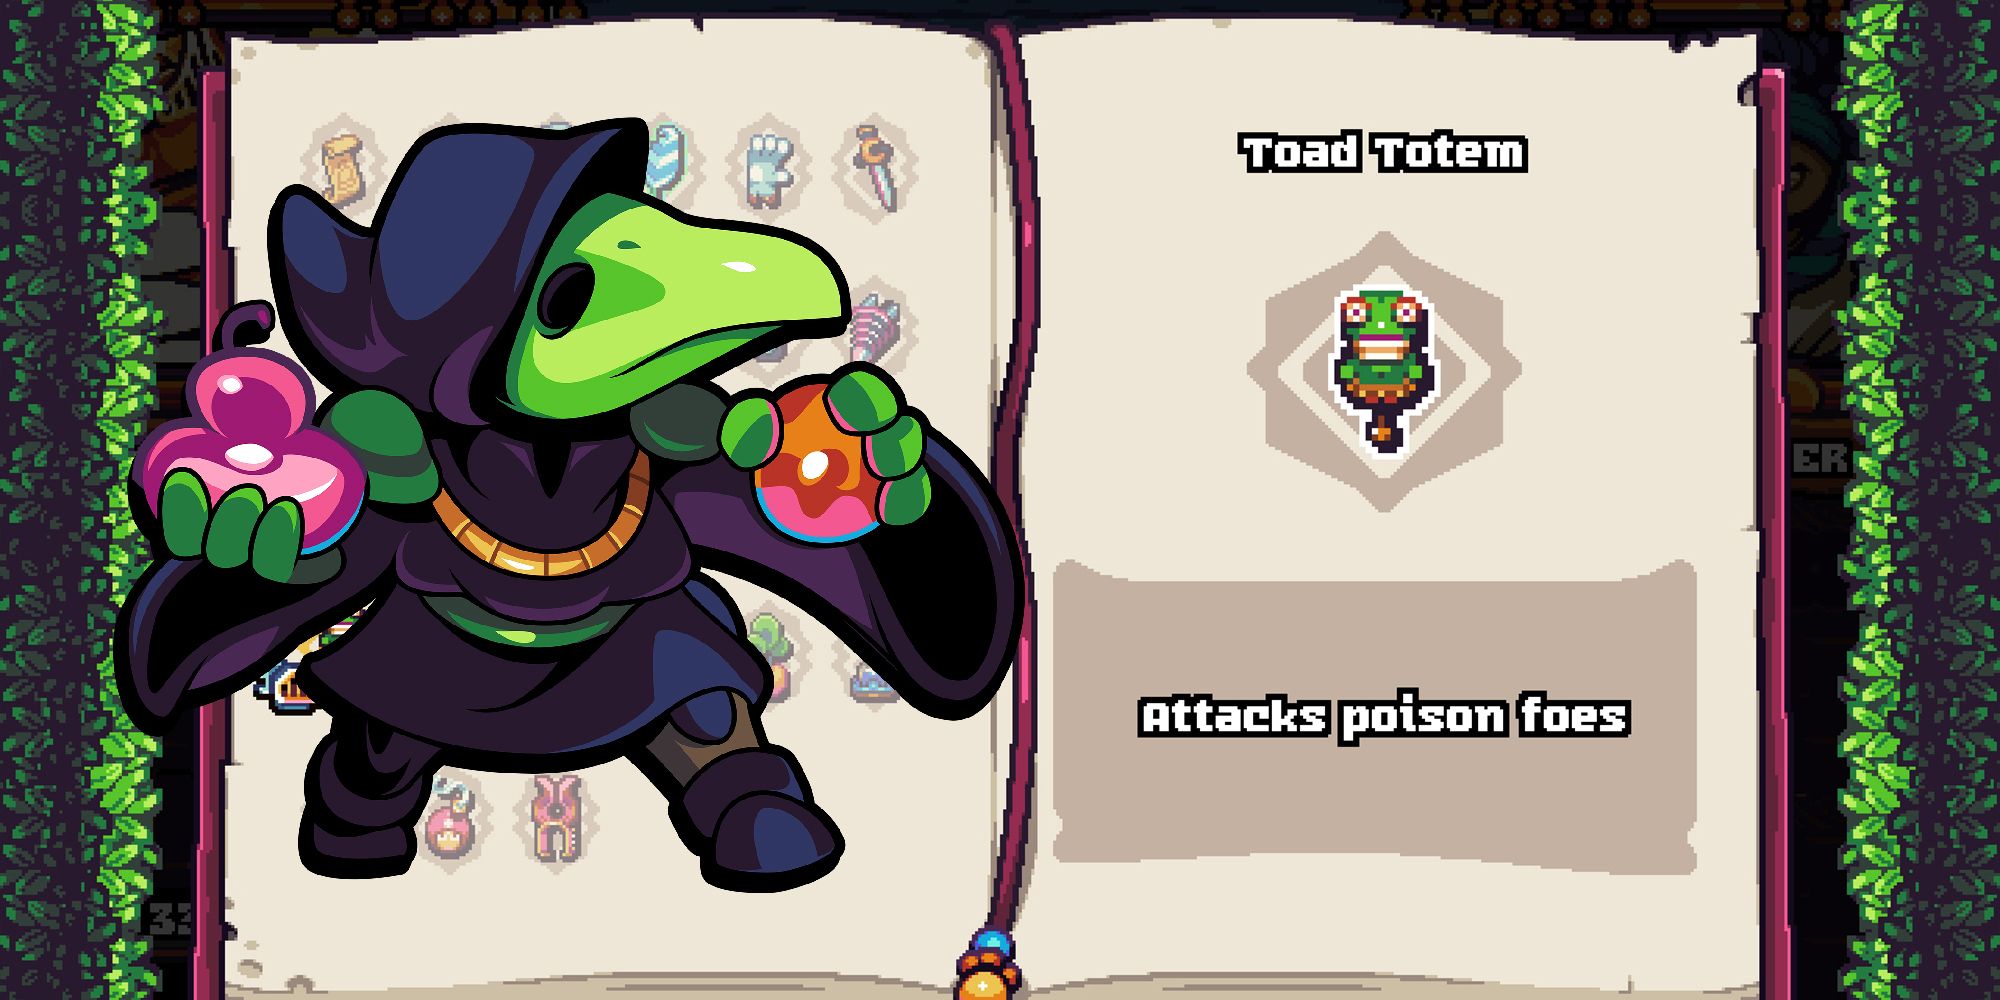 Shovel Knight Pocket Dungeon - The Toad Totem Codex Entry With A PNG of Plague Knight Overlaid On Top